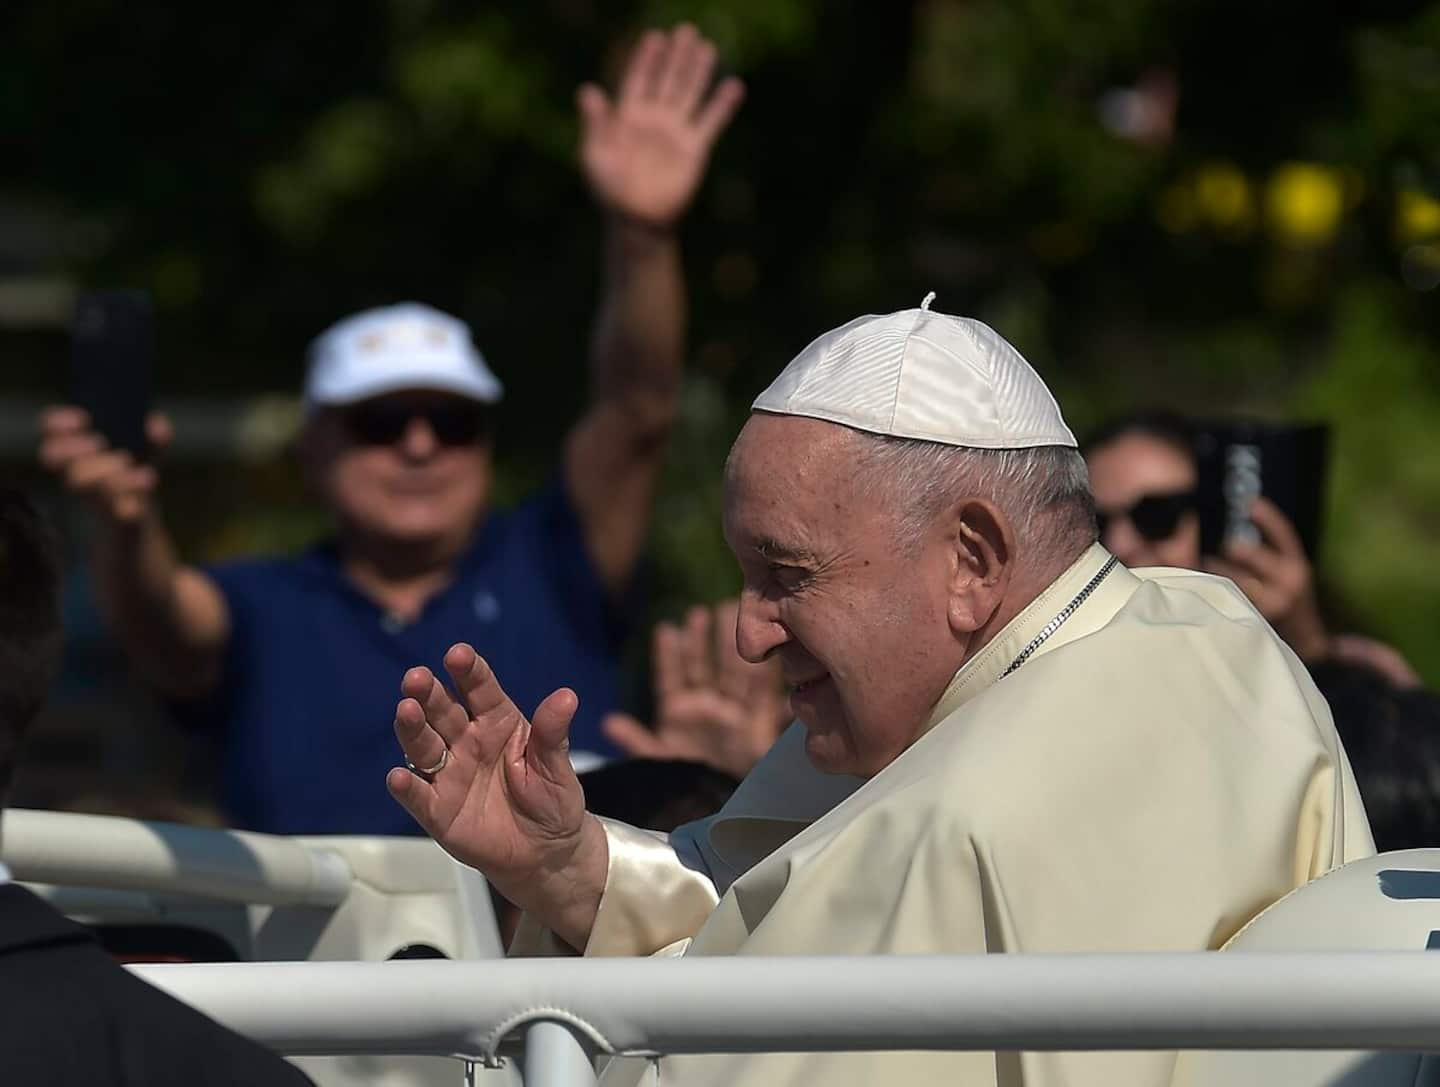 The Pope's visit will not change anything, Quebecers fear